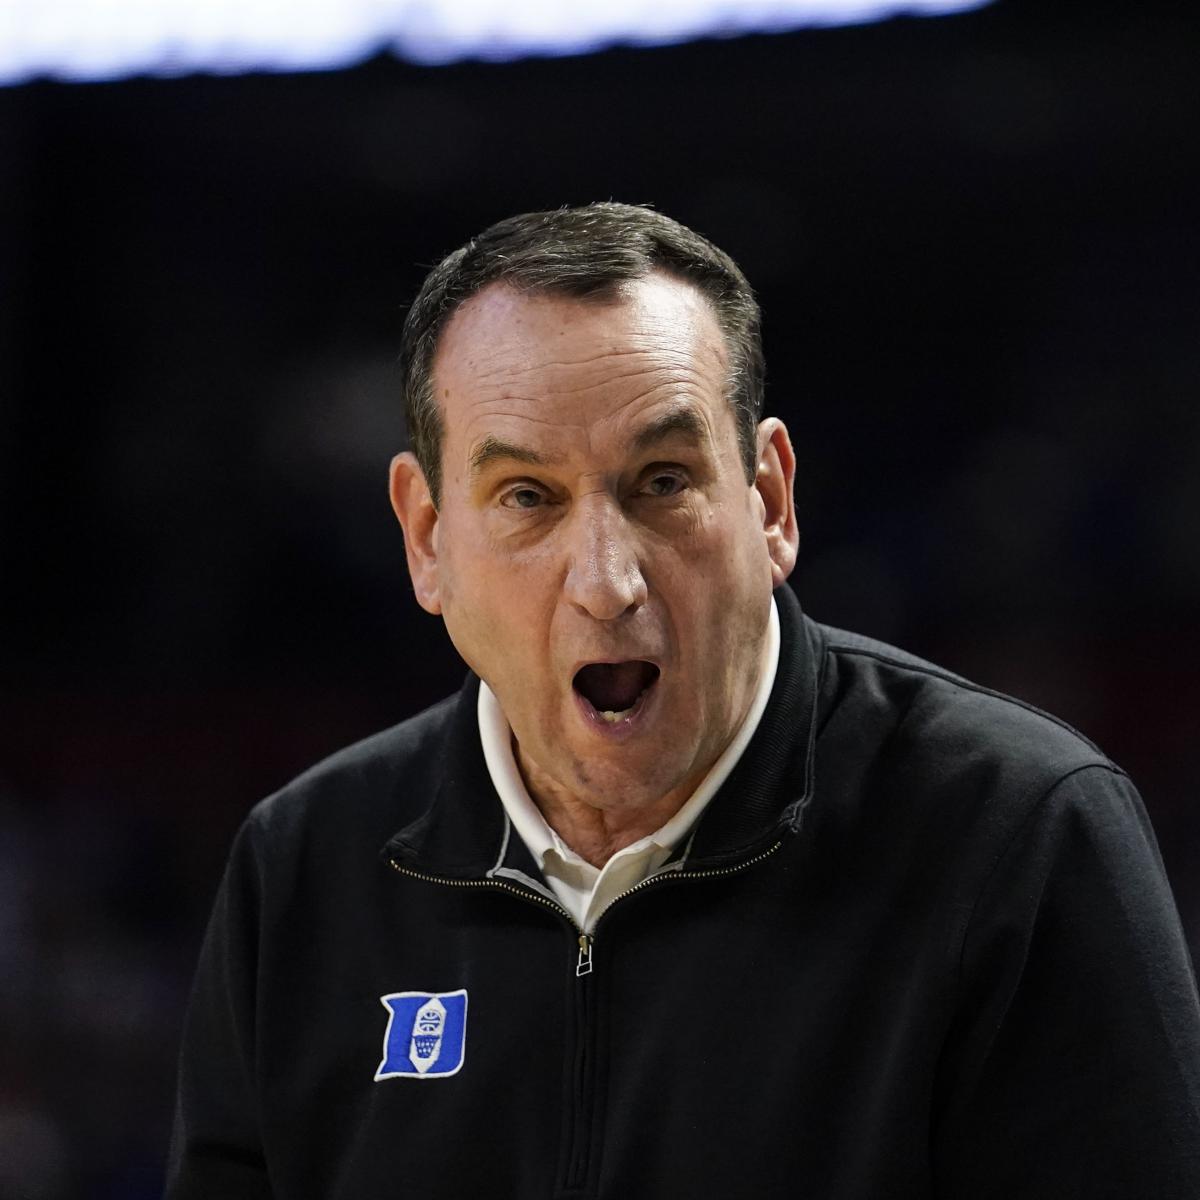 NCAA Tournament 2022: Ranking Top Seeds Most Likely to Fall in Sweet 16